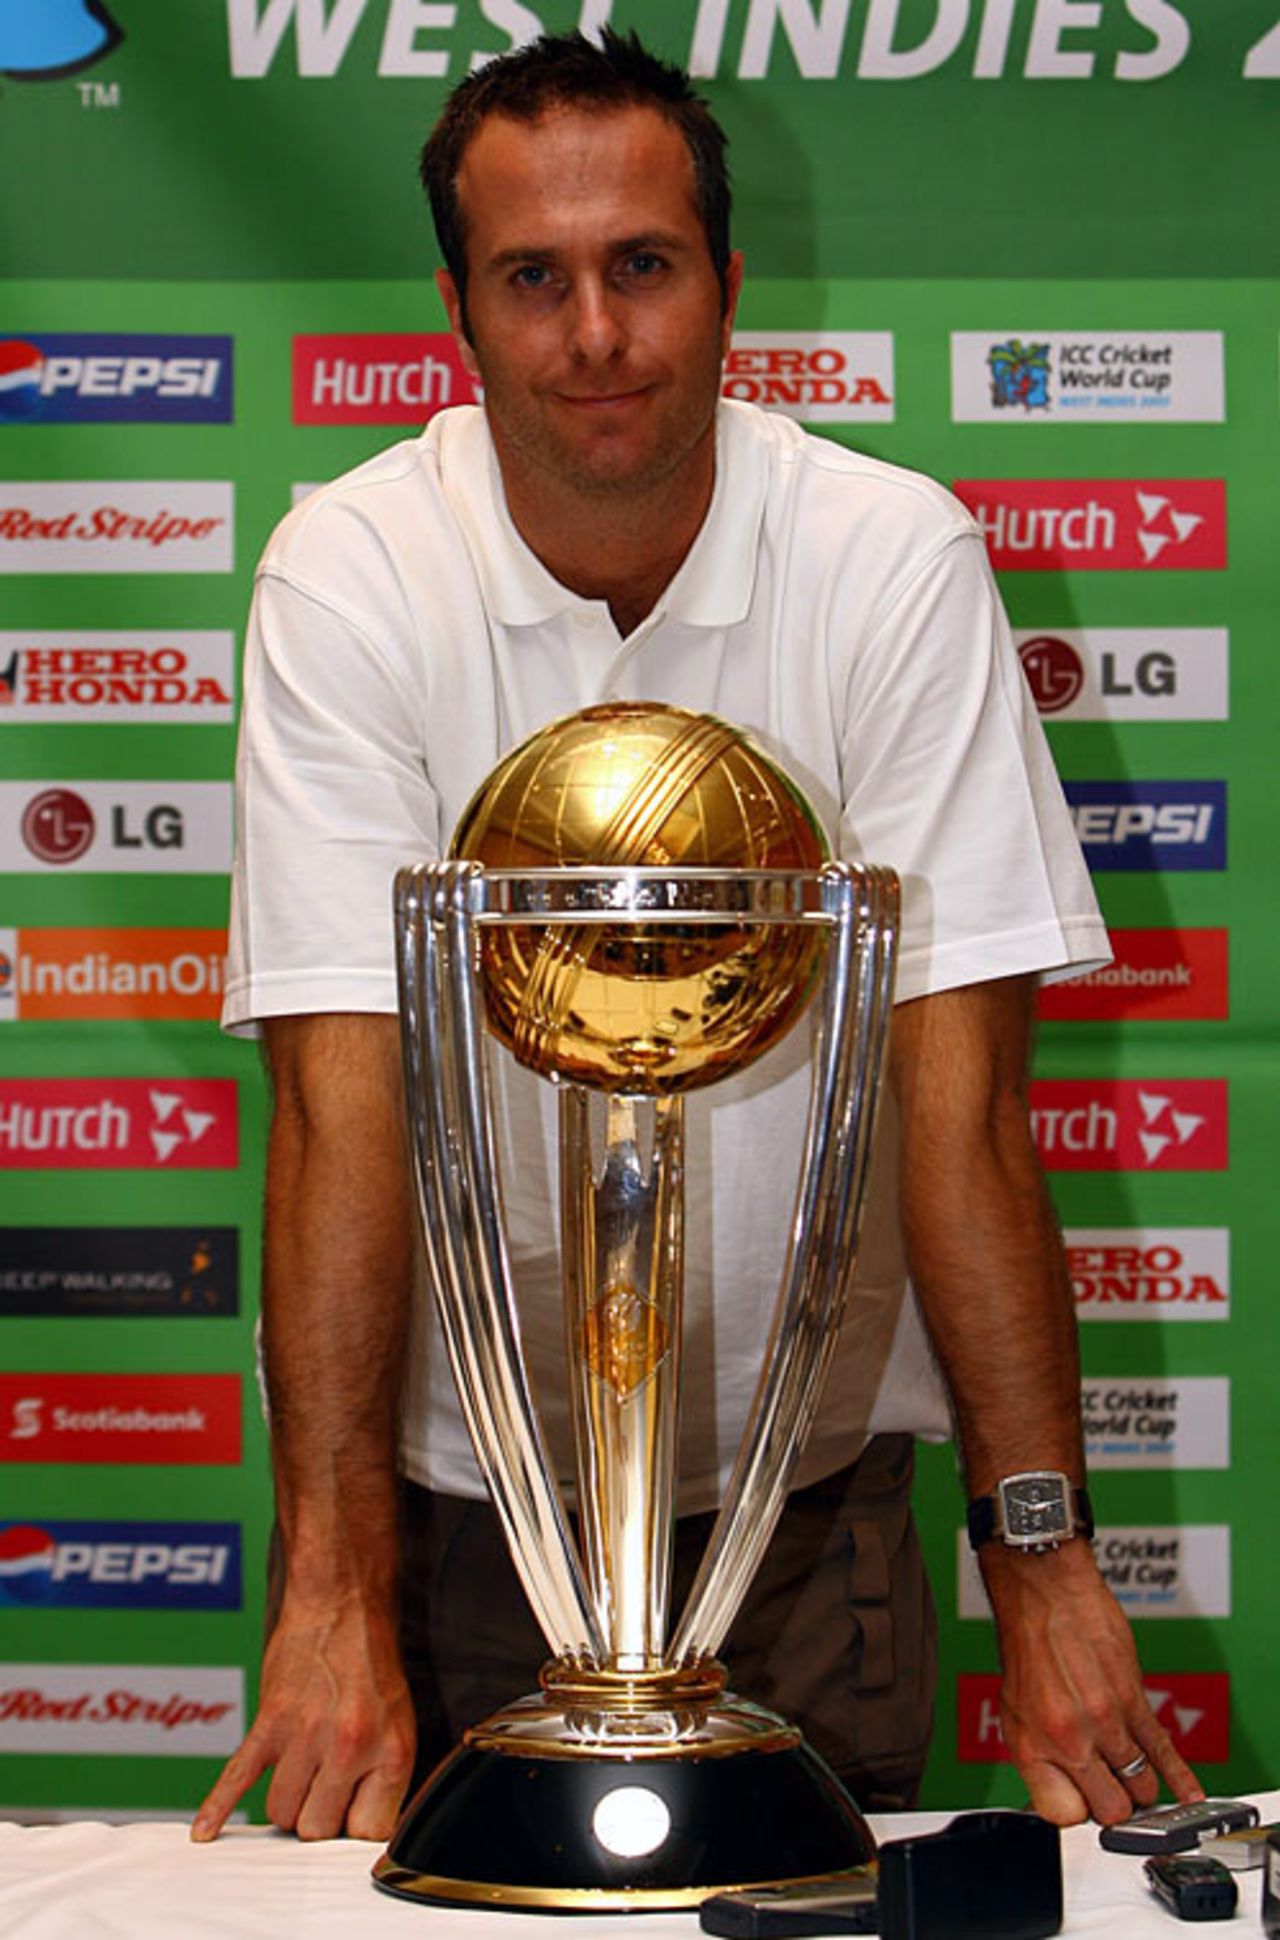 Michael Vaughan poses with the World Cup trophy at a press conference in Montego Bay, Jamaica, March 11, 2007